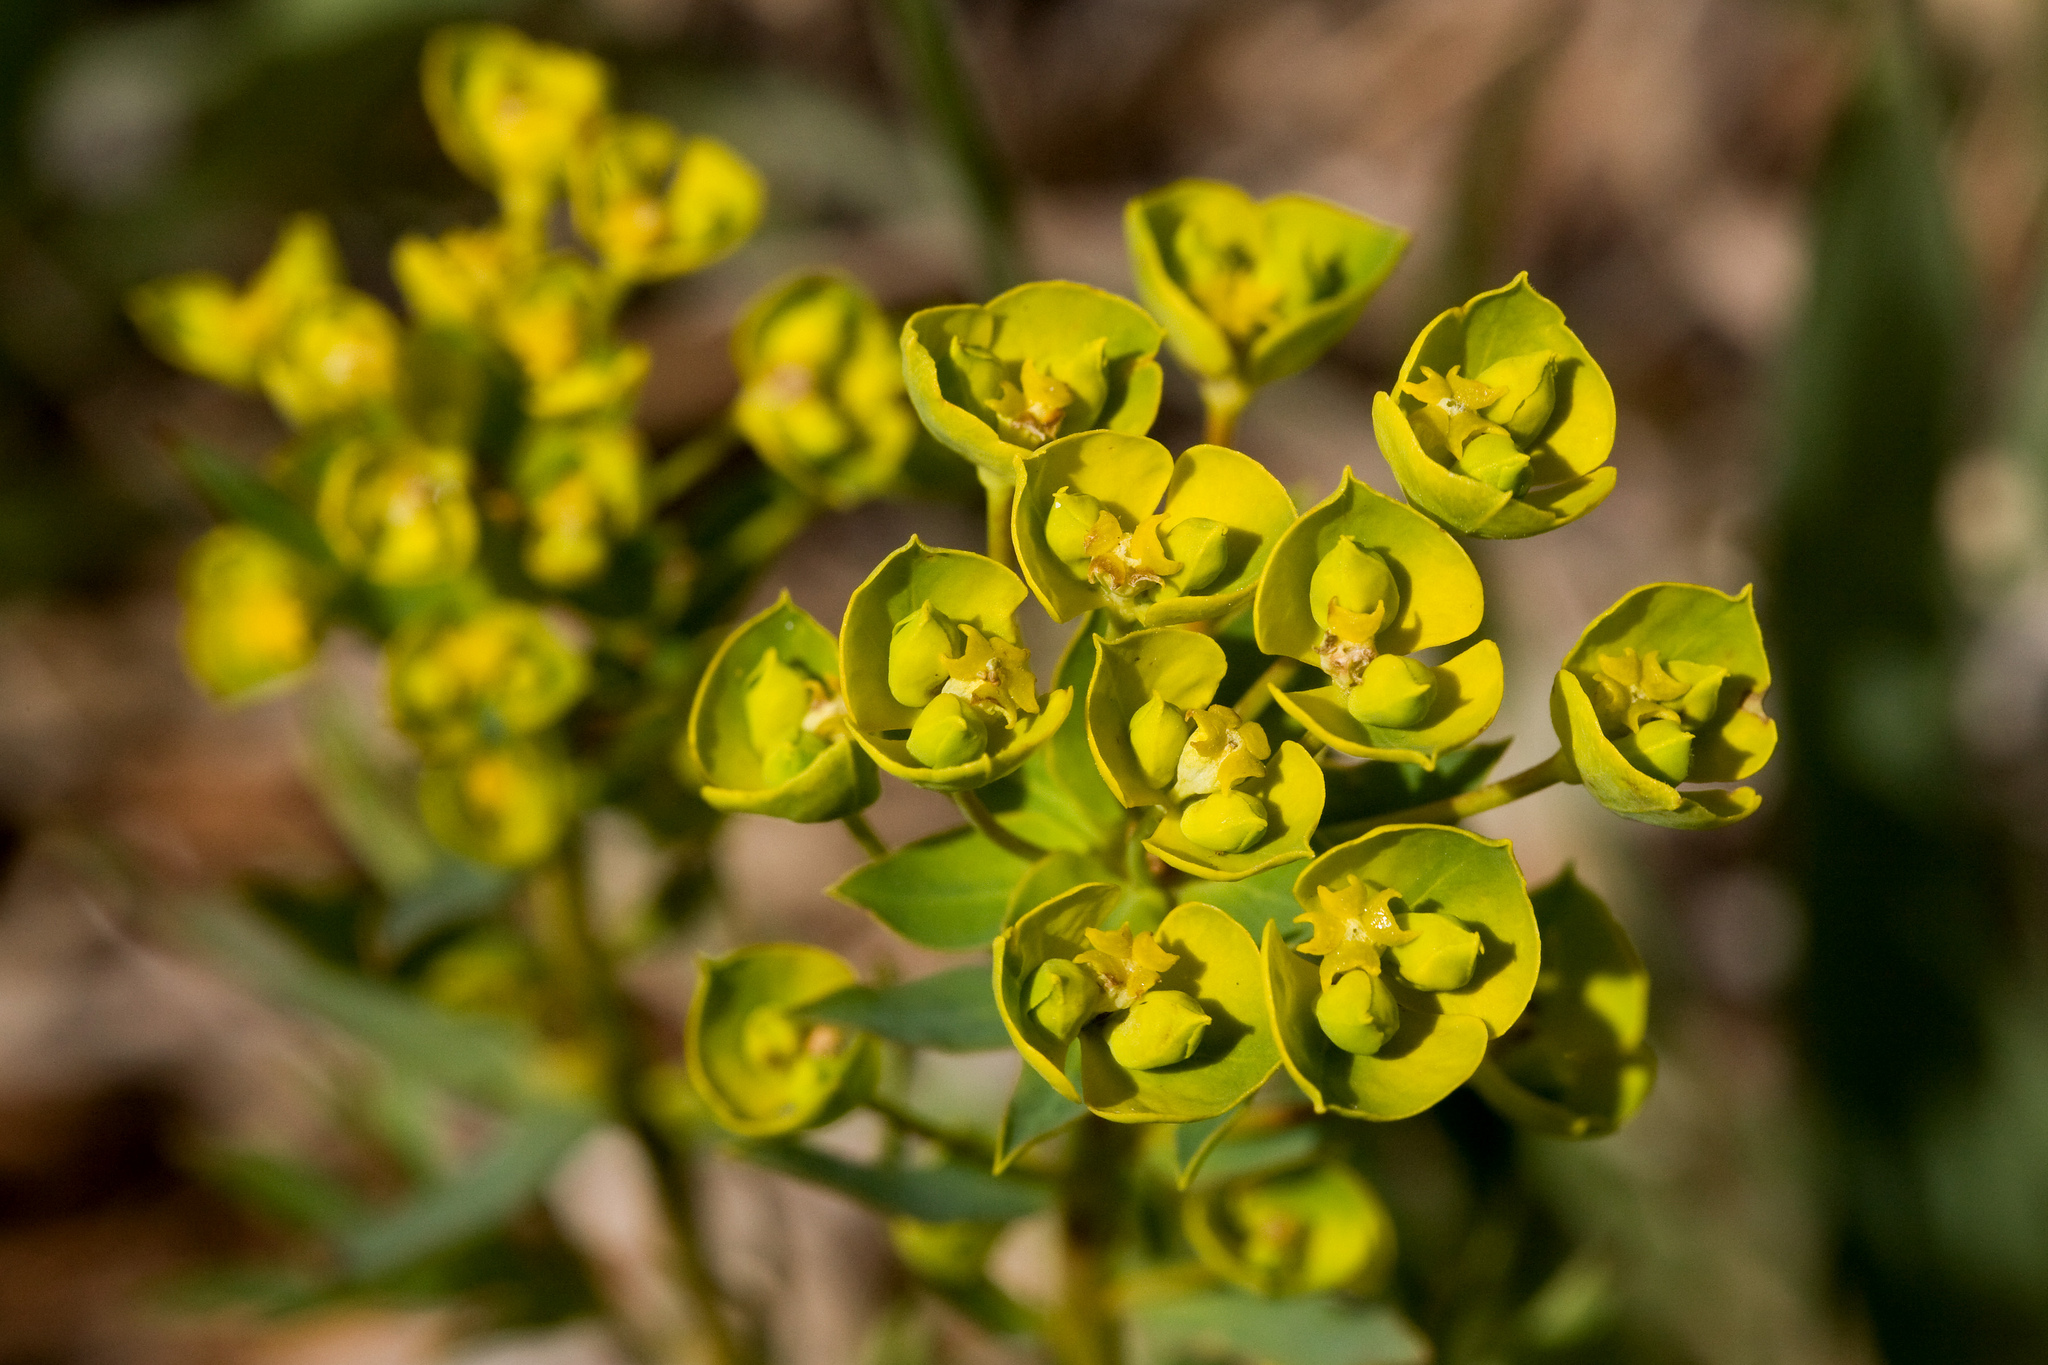 Cluster of small yellow flowers surrounded by yellow-green bracts